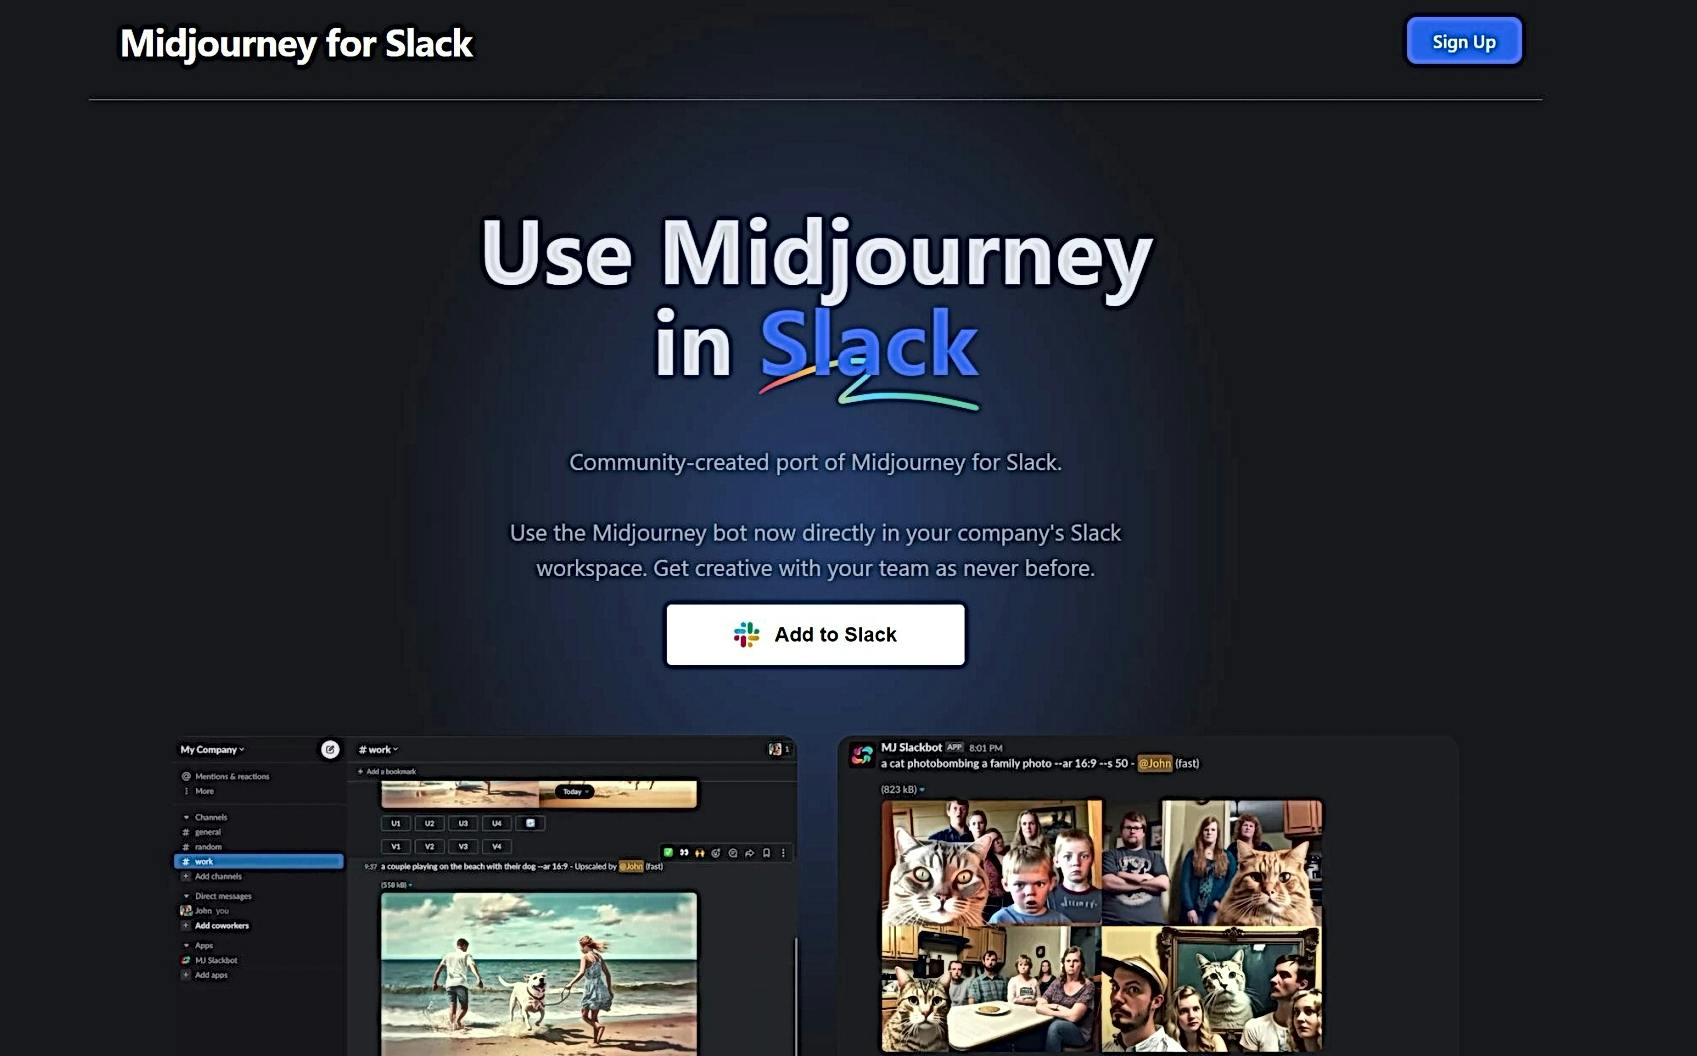 Midjourney for Slack featured